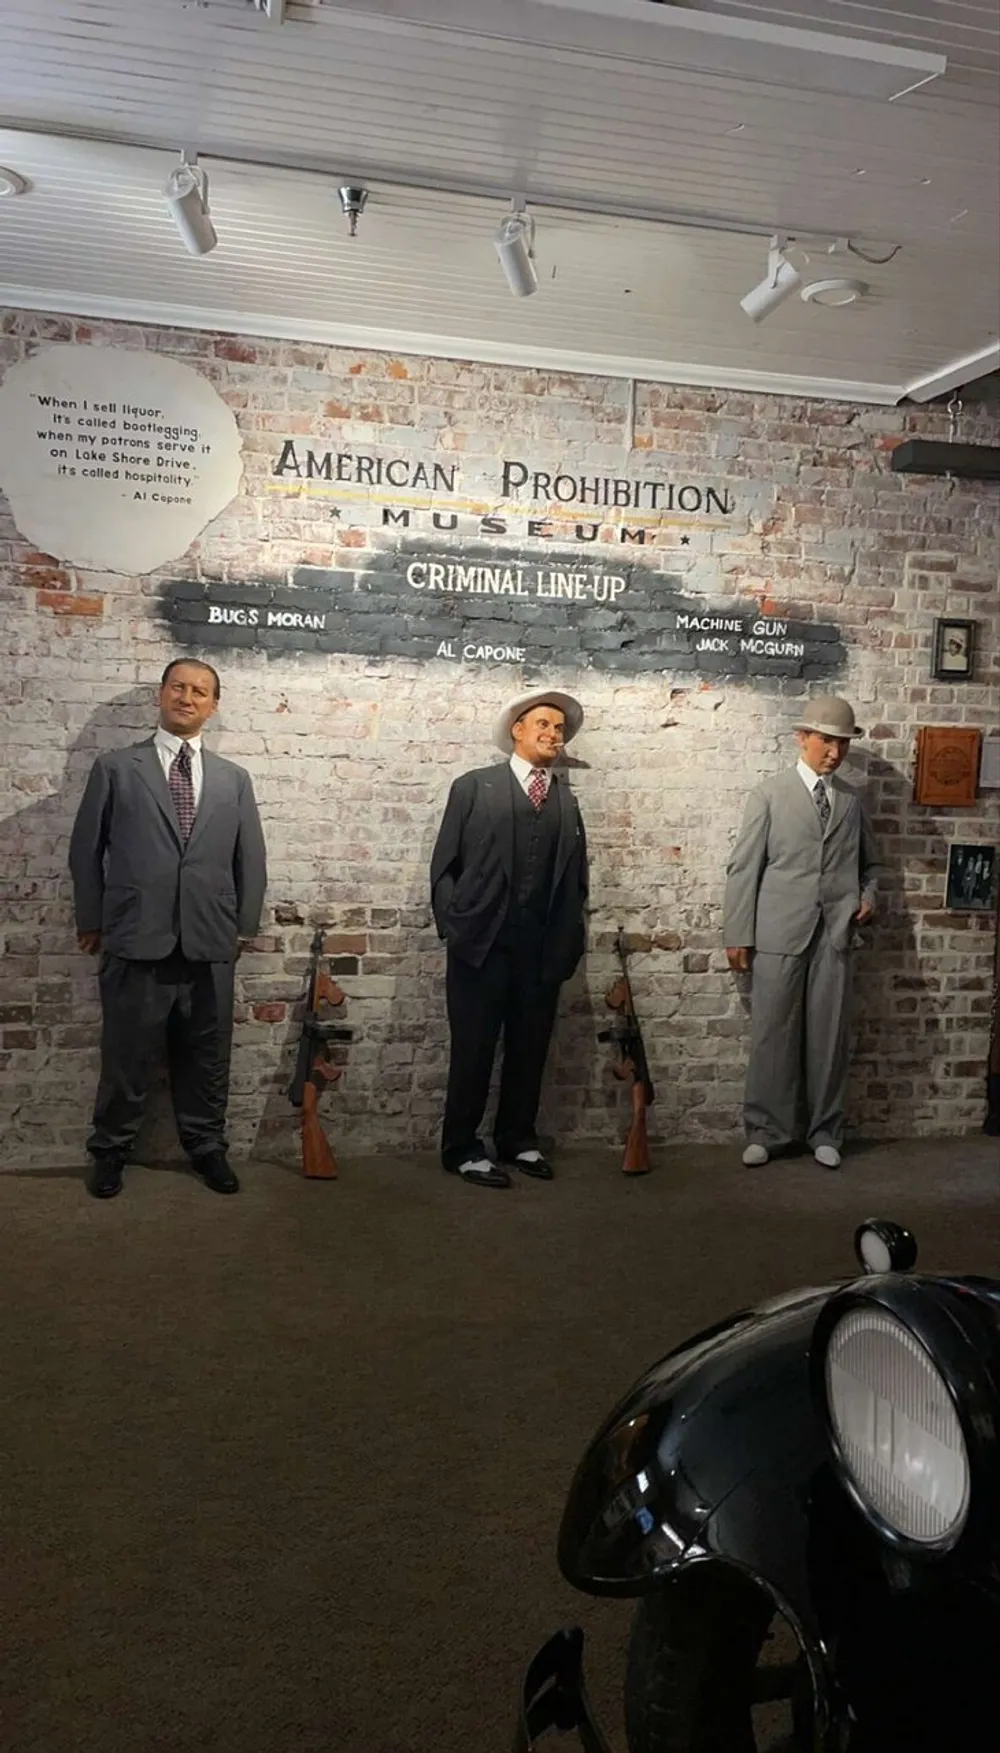 The image appears to be an exhibit at the American Prohibition Museum showing a criminal lineup featuring models or mannequins representing notable figures from the Prohibition era accompanied by placards with names like Bugs Moran Al Capone and Machine Gun Jack McGurn presented in front of a vintage cars headlight